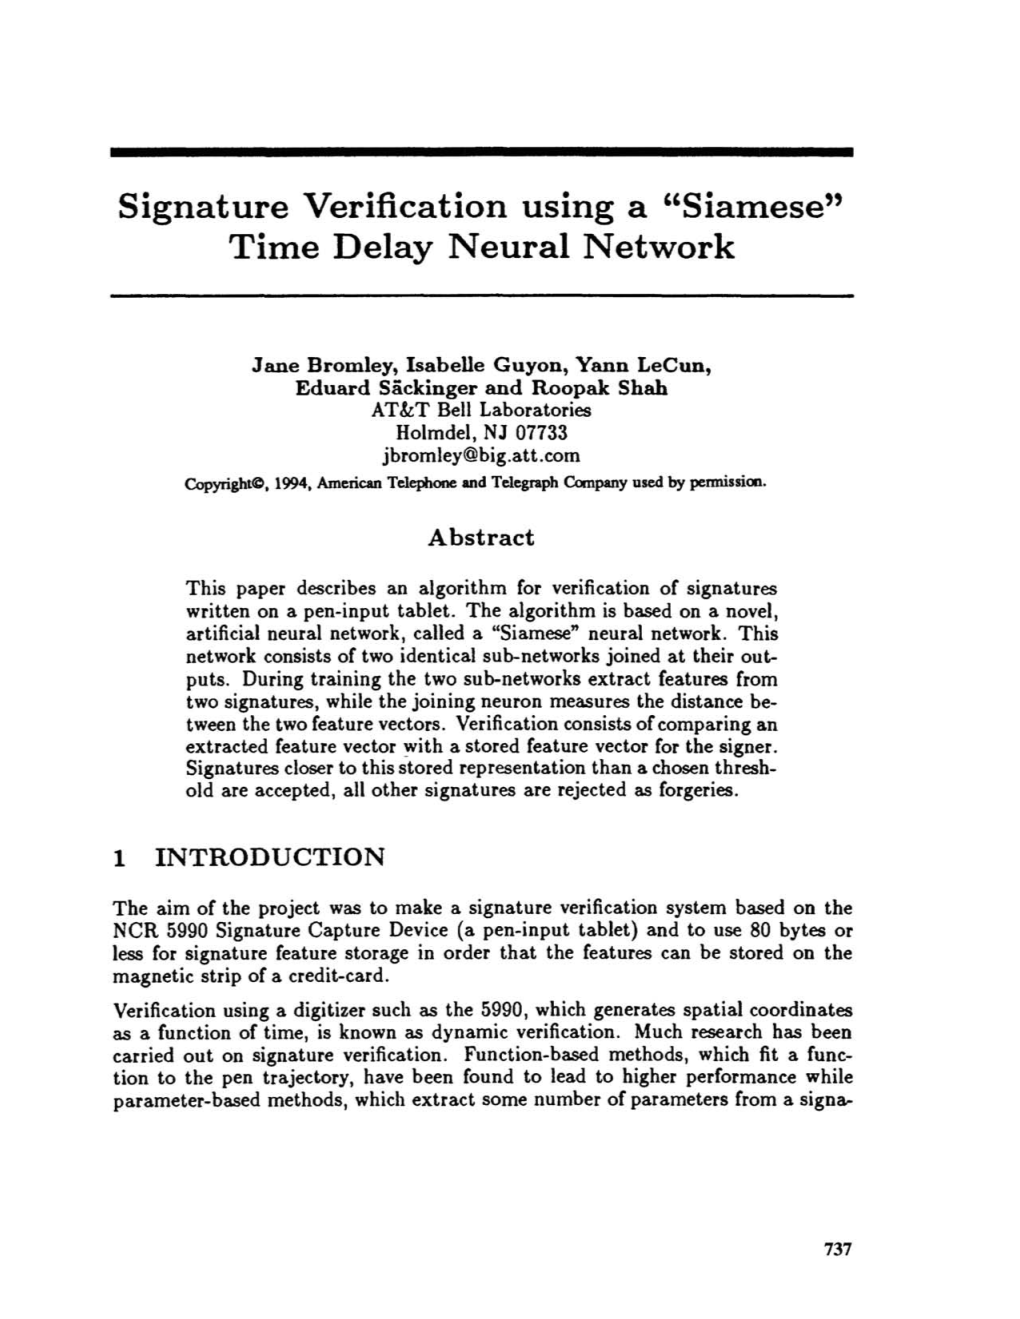 Signature Verification Using a "Siamese" Time Delay Neural Network